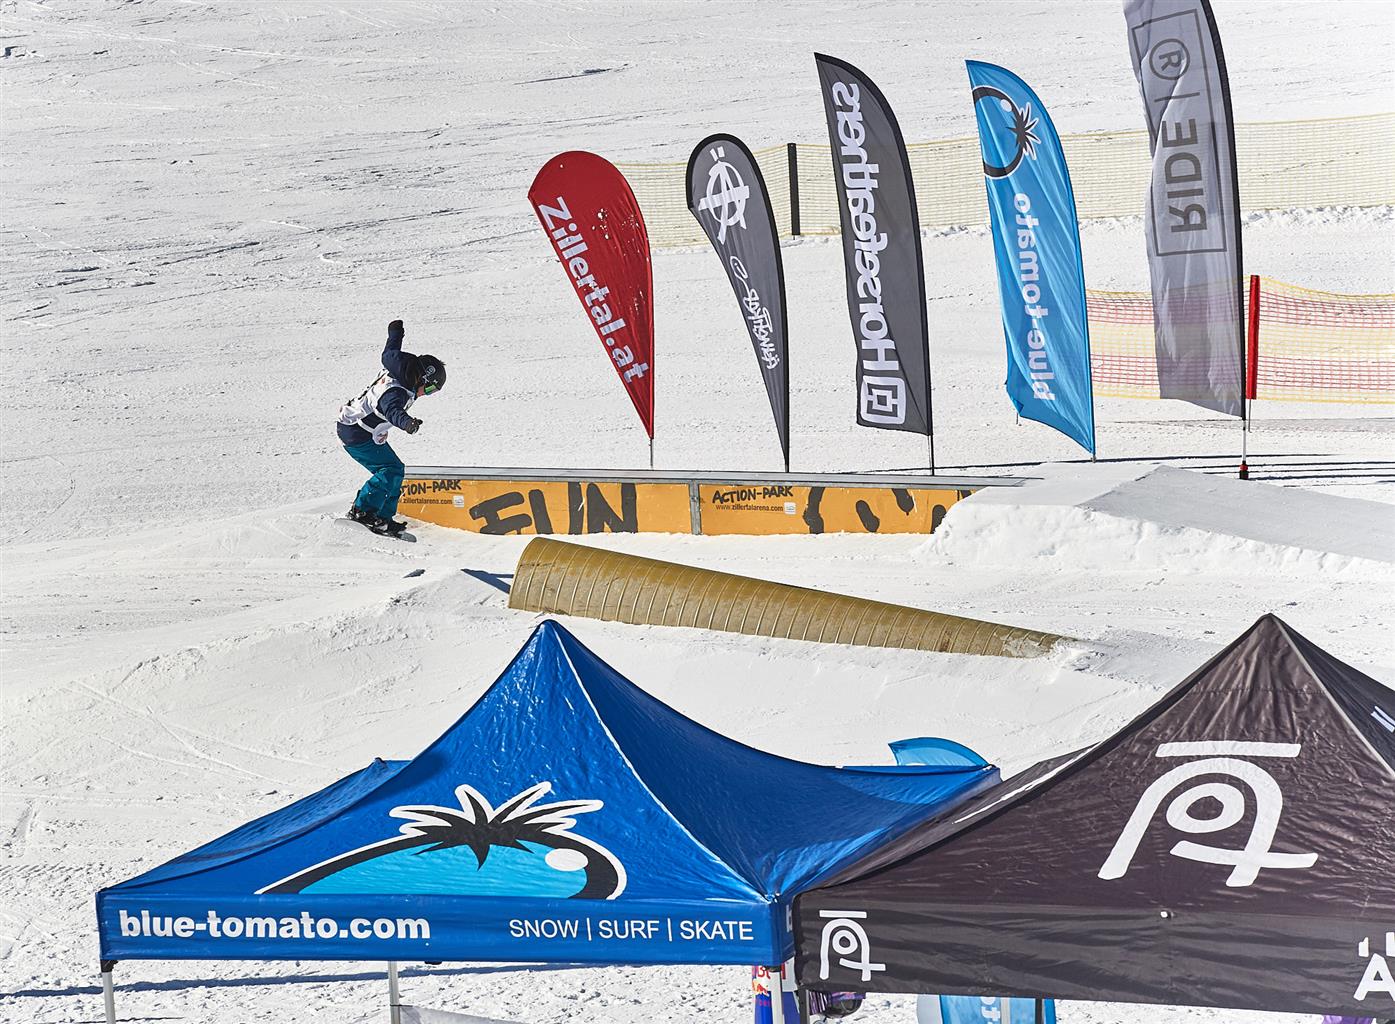 Boardriding Events Zillertal Valley Ralley hosted by Blue Tomato and Ride Snowboards - stop #2